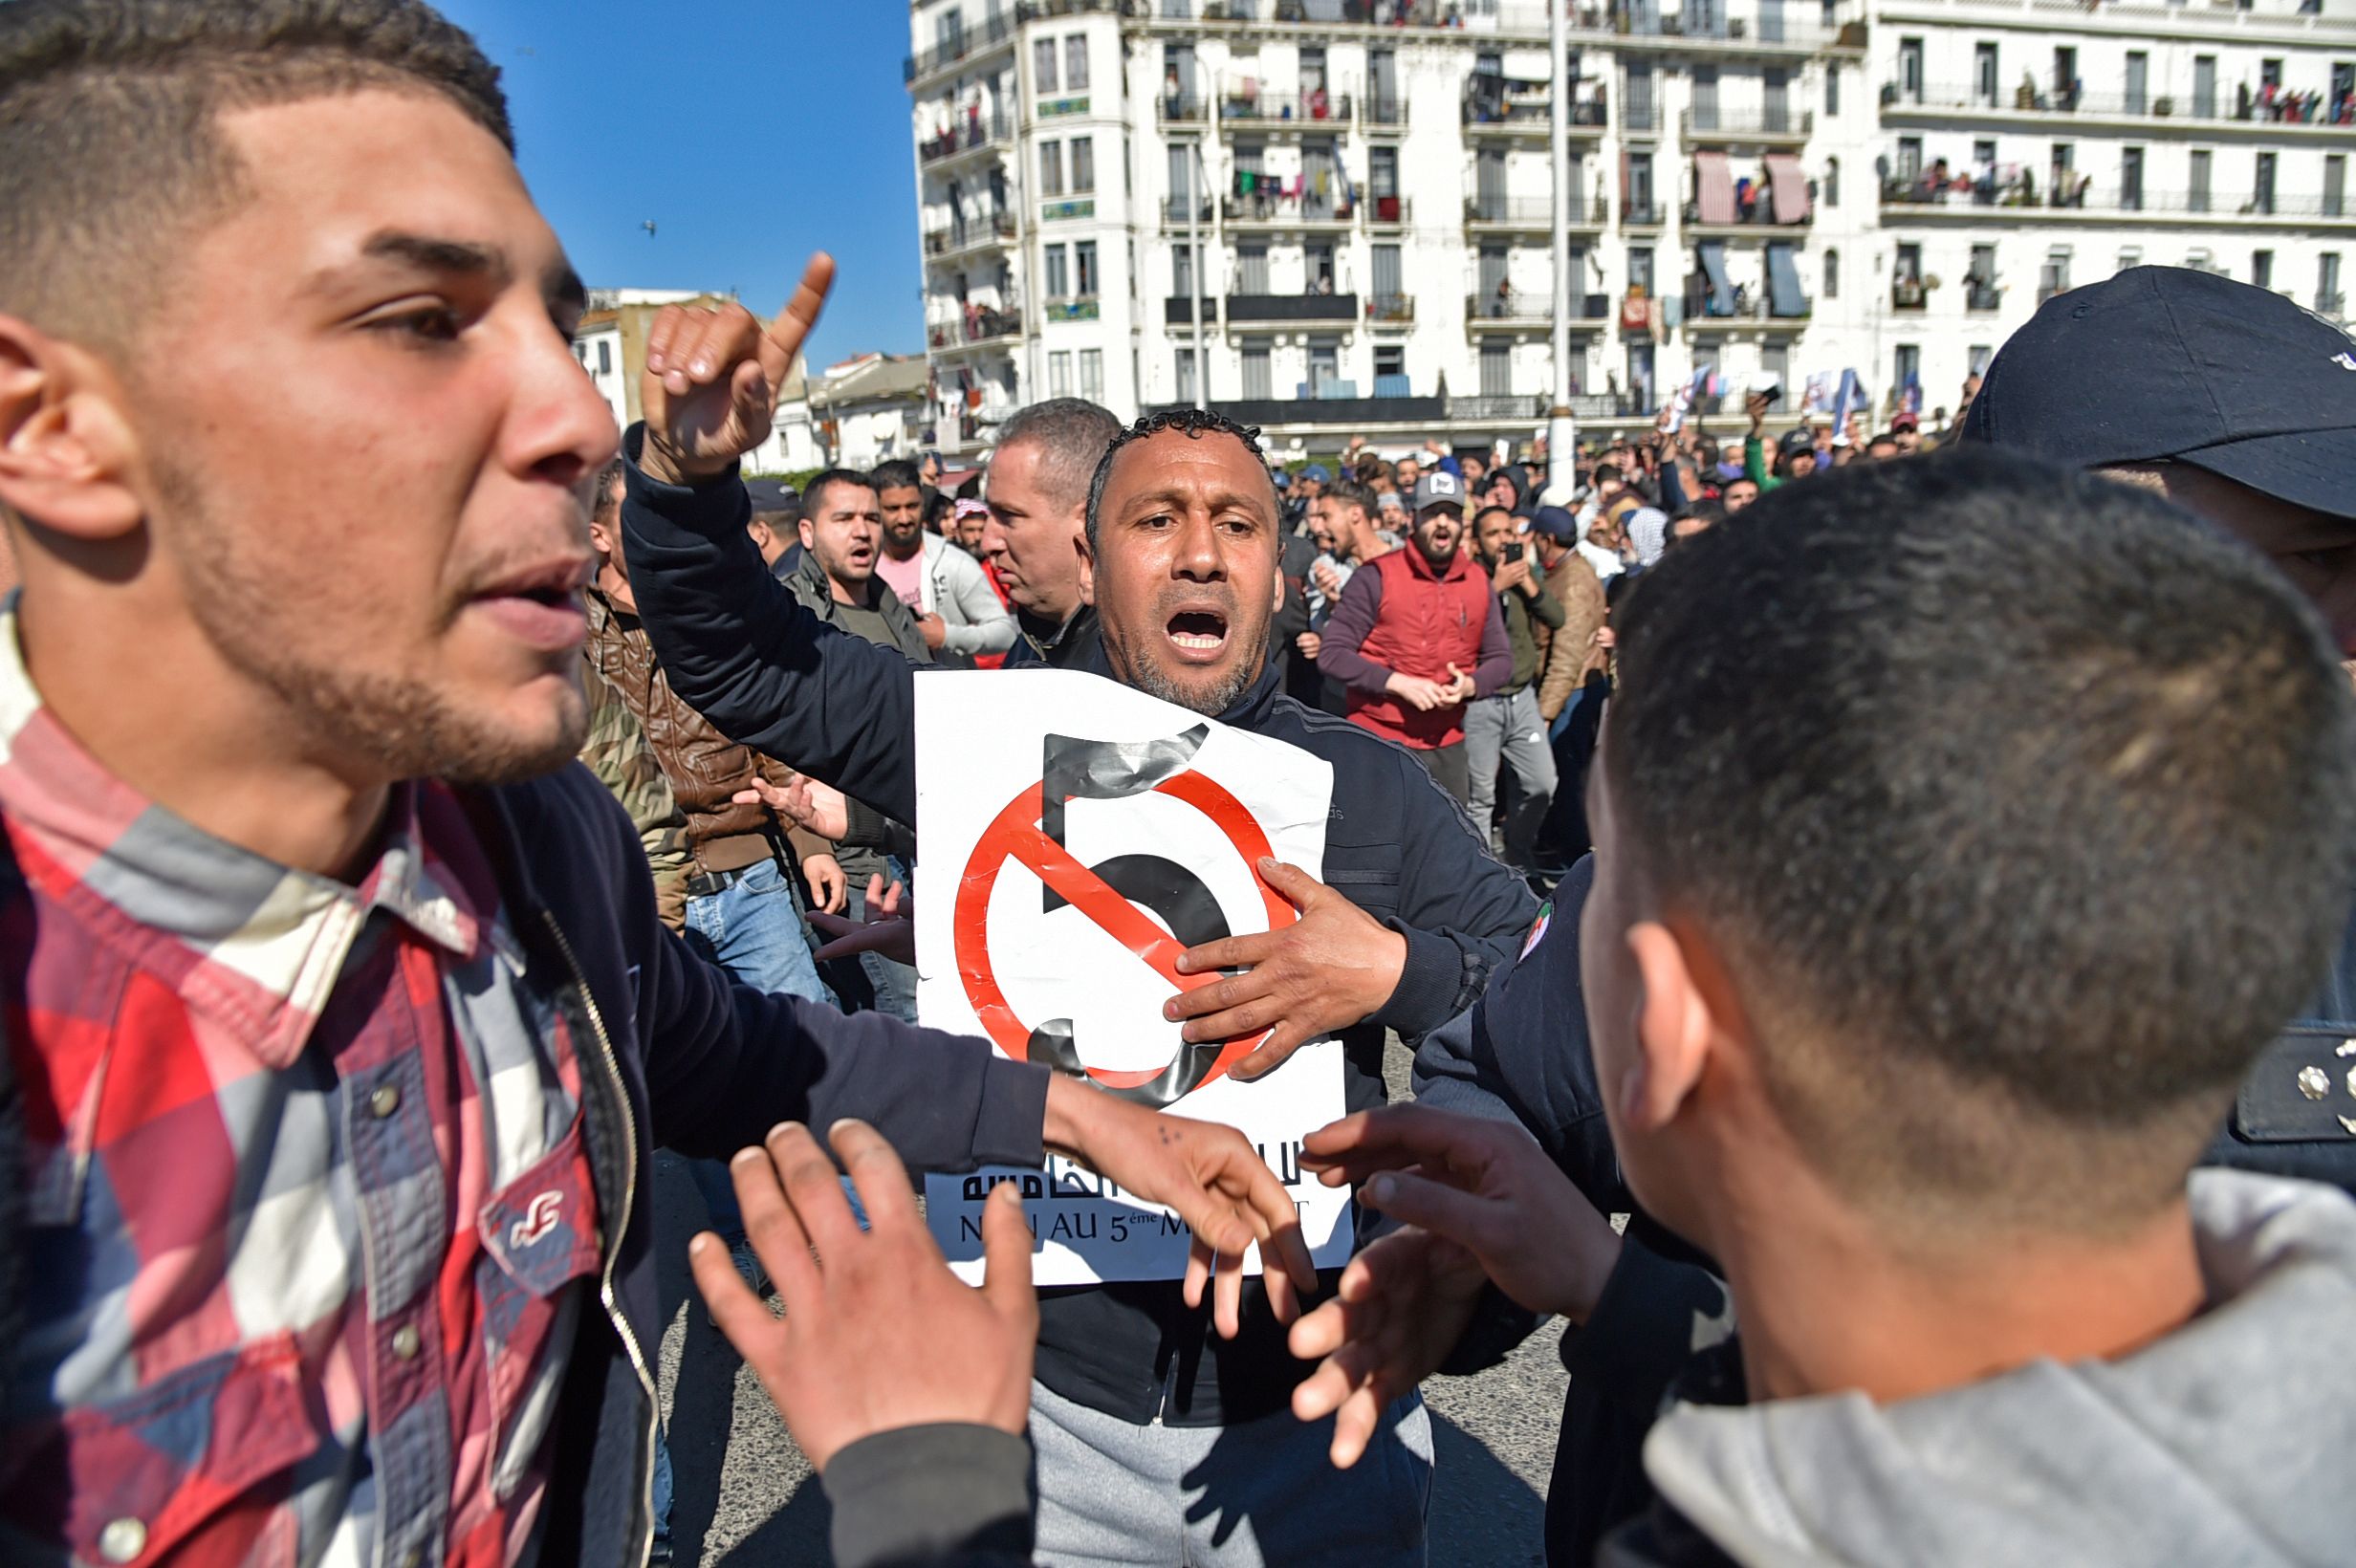 Algerian protestors demonstrate against their president's candidacy for a fifth term, on February 22, 2019 in Algiers.